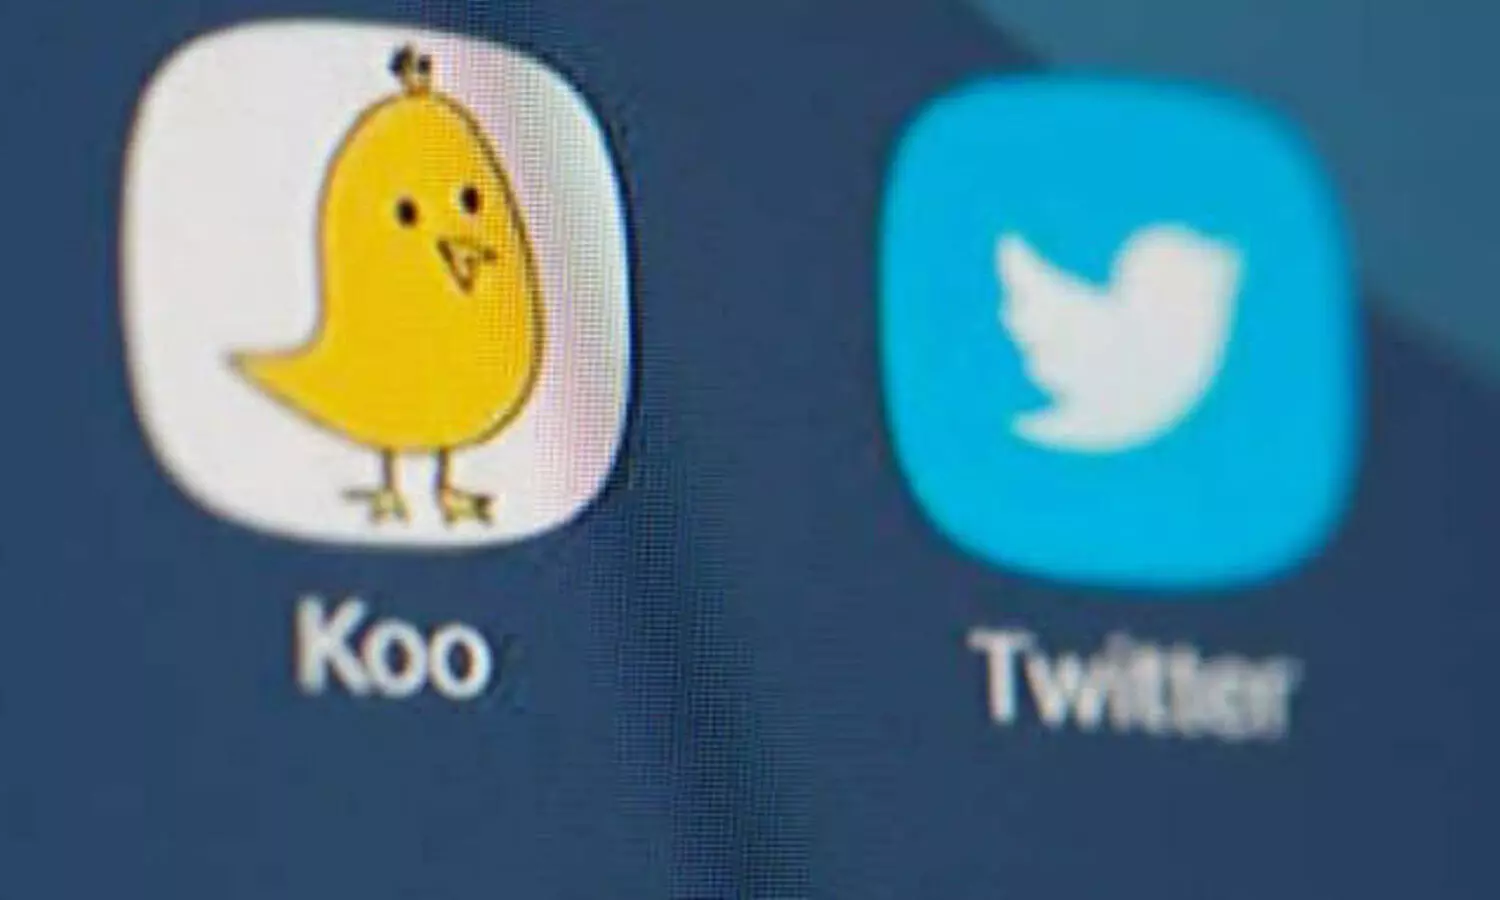 Koo aims to expand its Nigeria presence after country bans Twitter